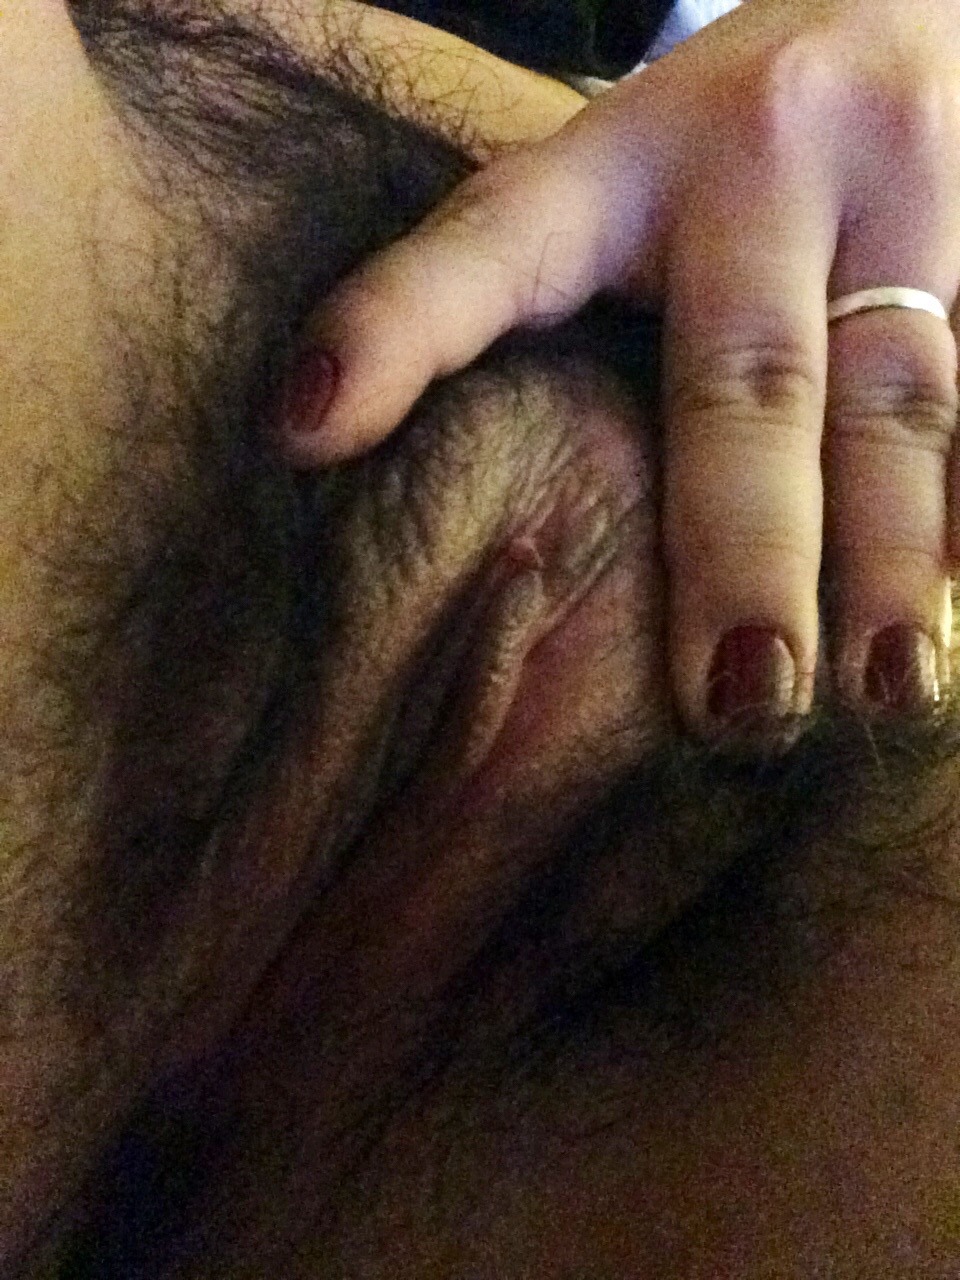 18 year old tight virgin pussy